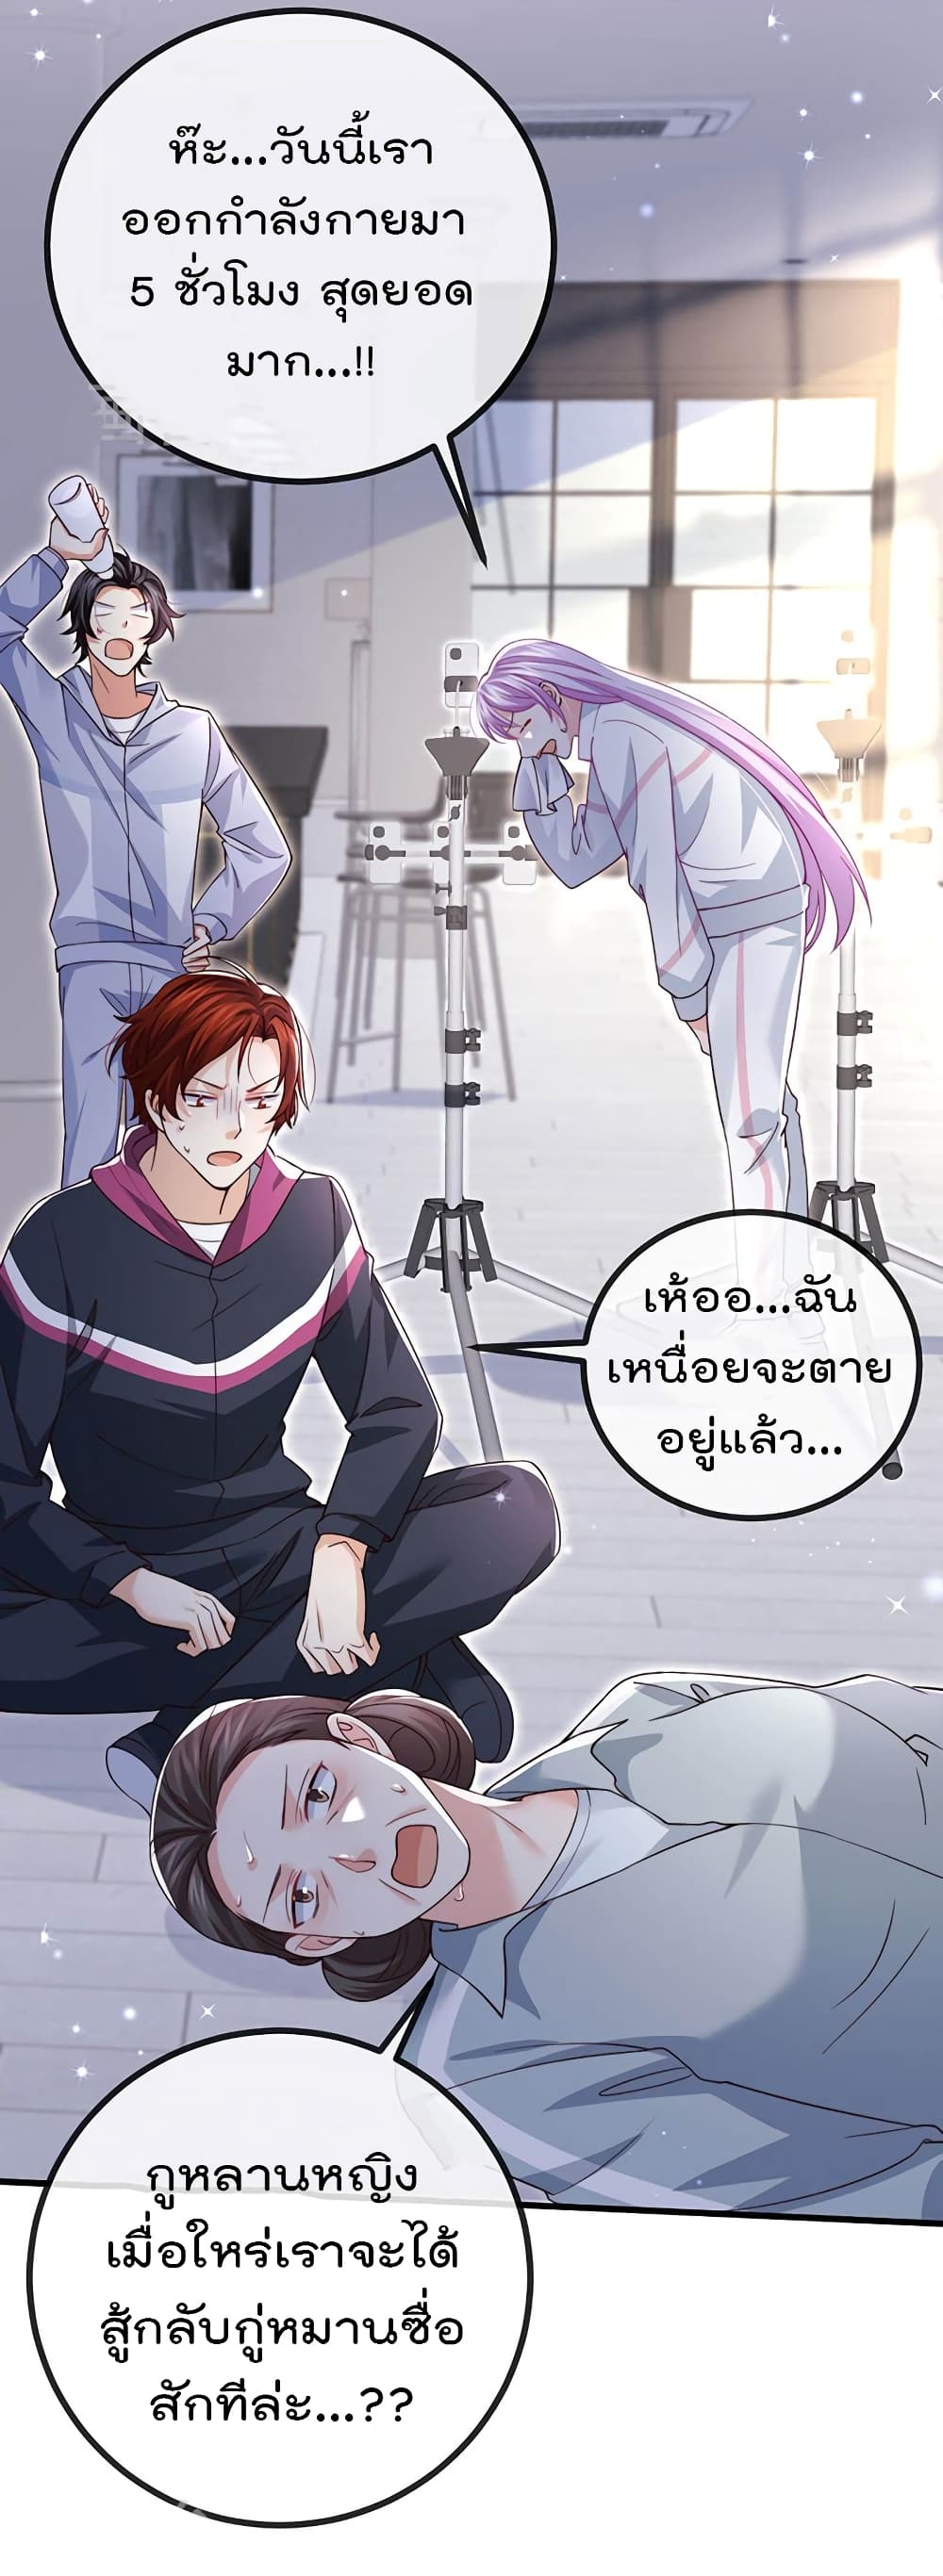 One Hundred Ways to Abuse Scum ตอนที่ 81 (23)